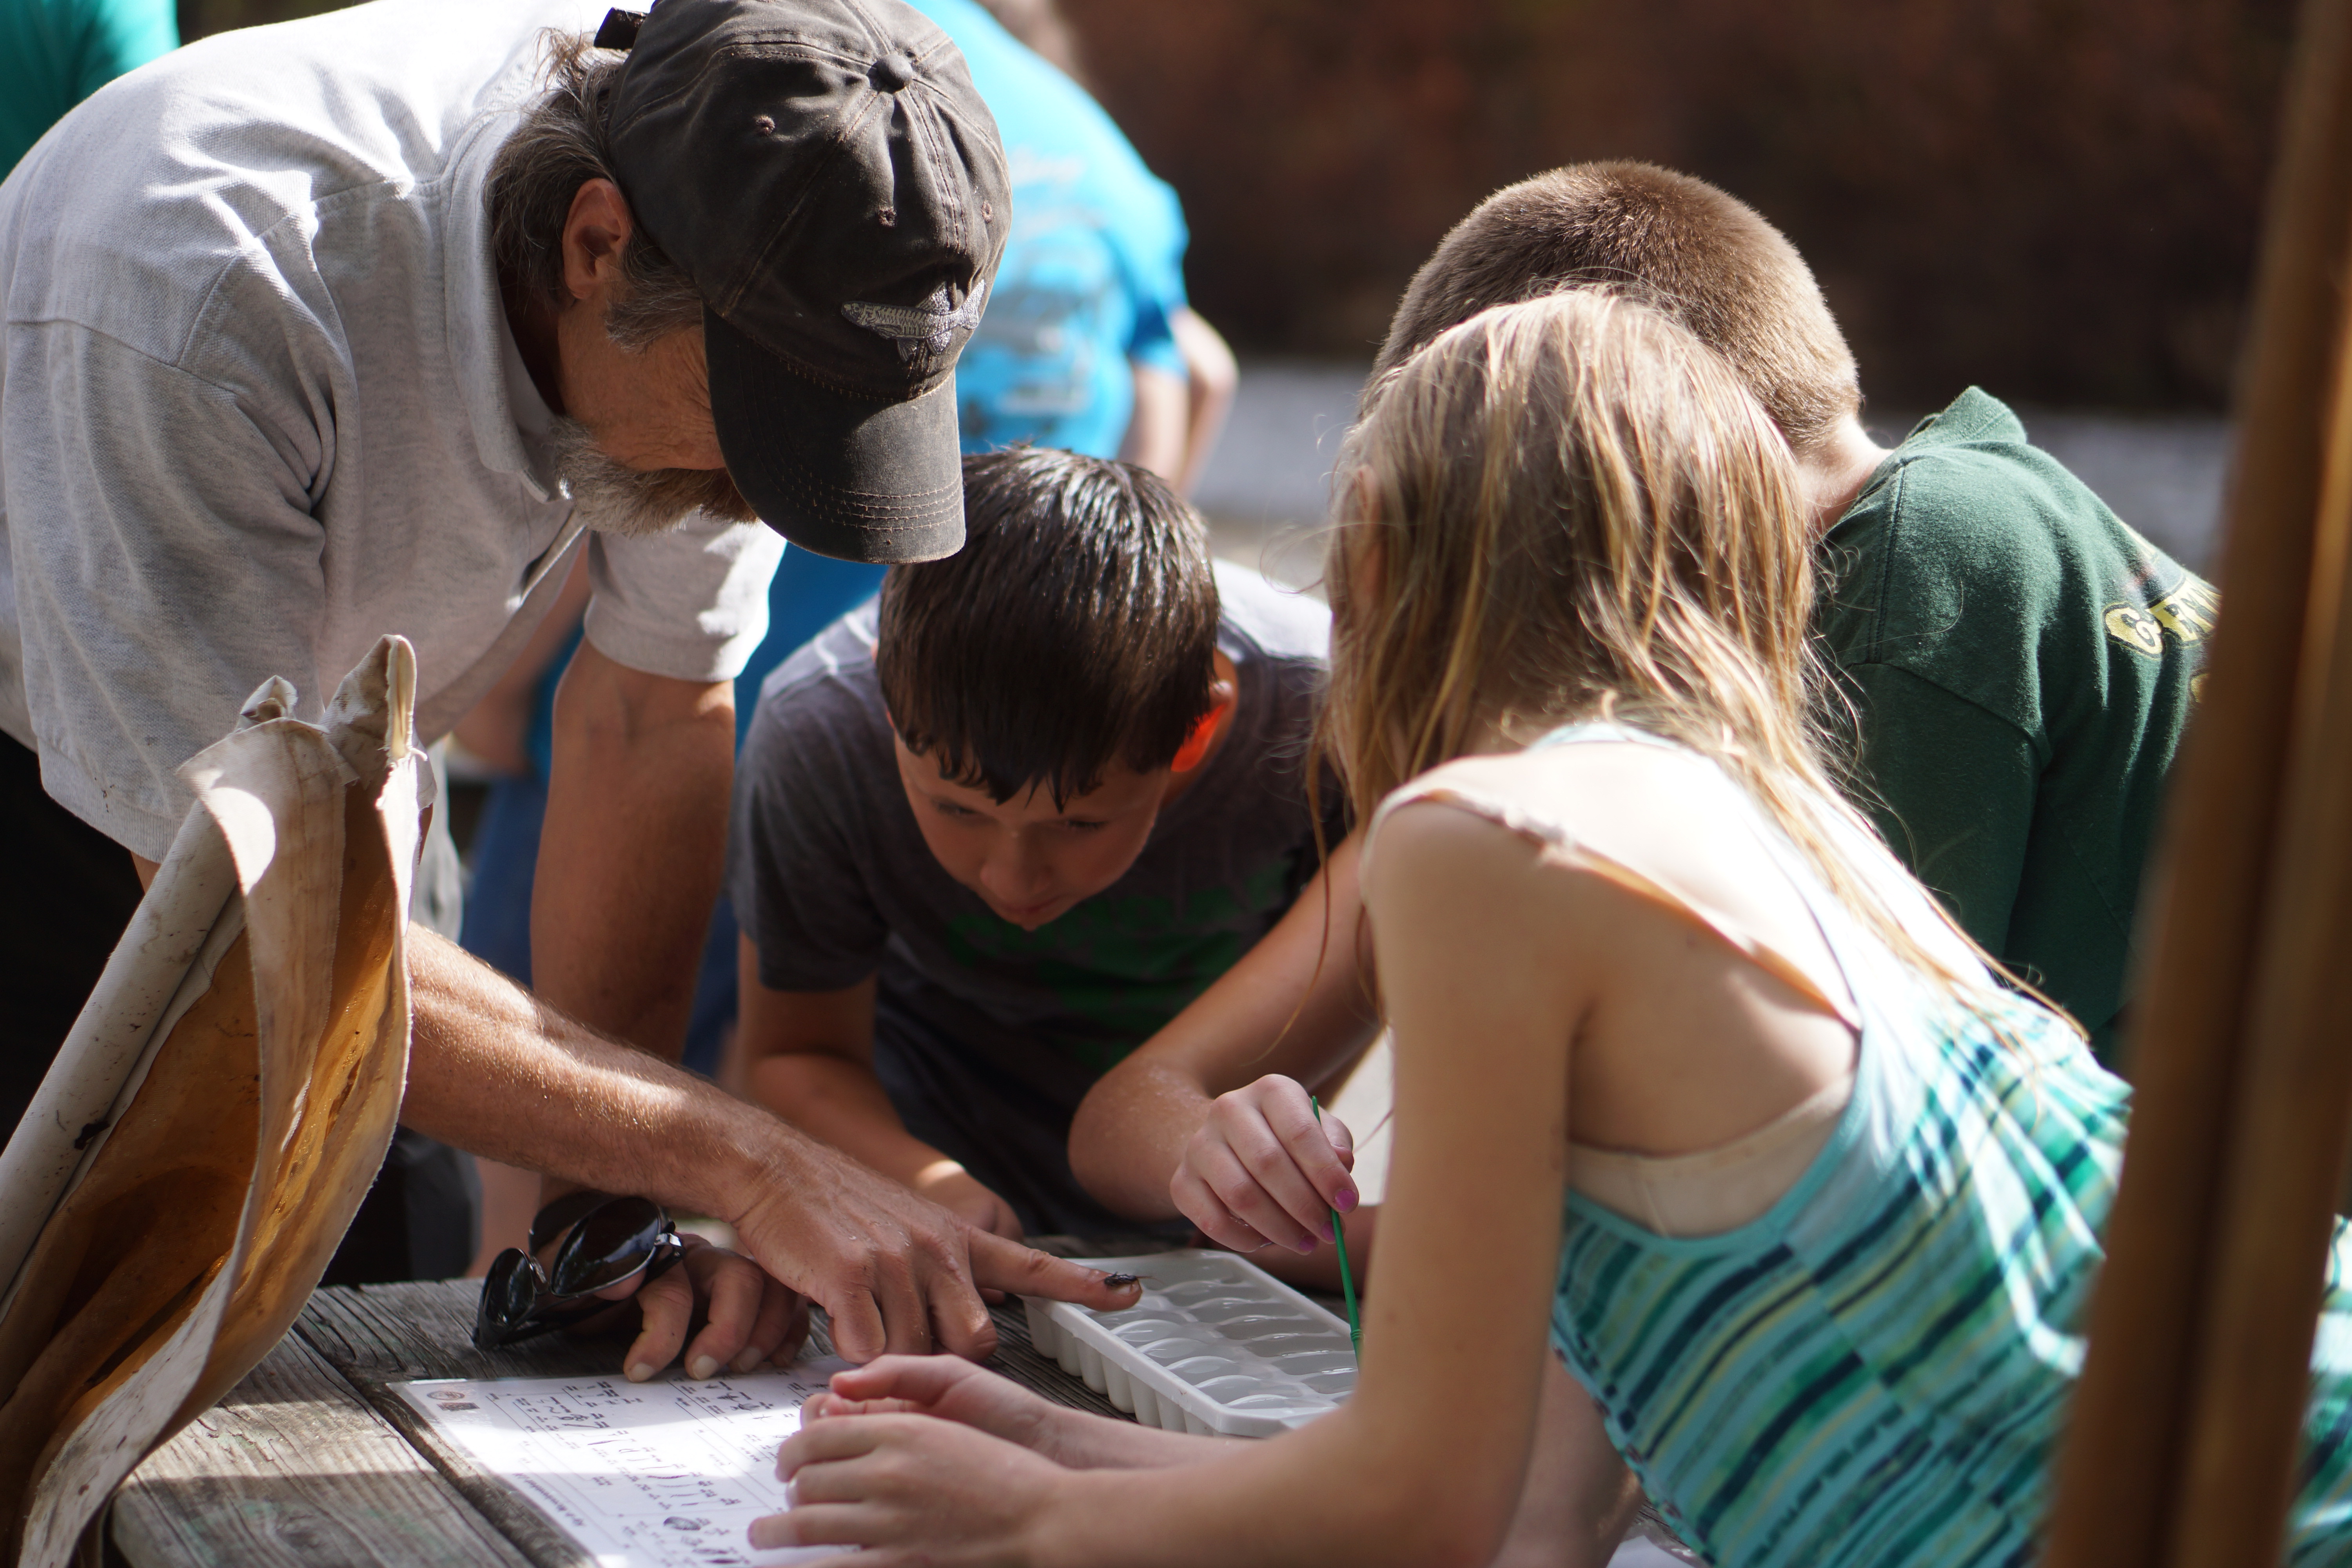 Fish and wildlife biologist, John Fridell, holds out a stream invertebrate to fifth grade students during Asheville, North Carolina's Toes in the Toe Festival